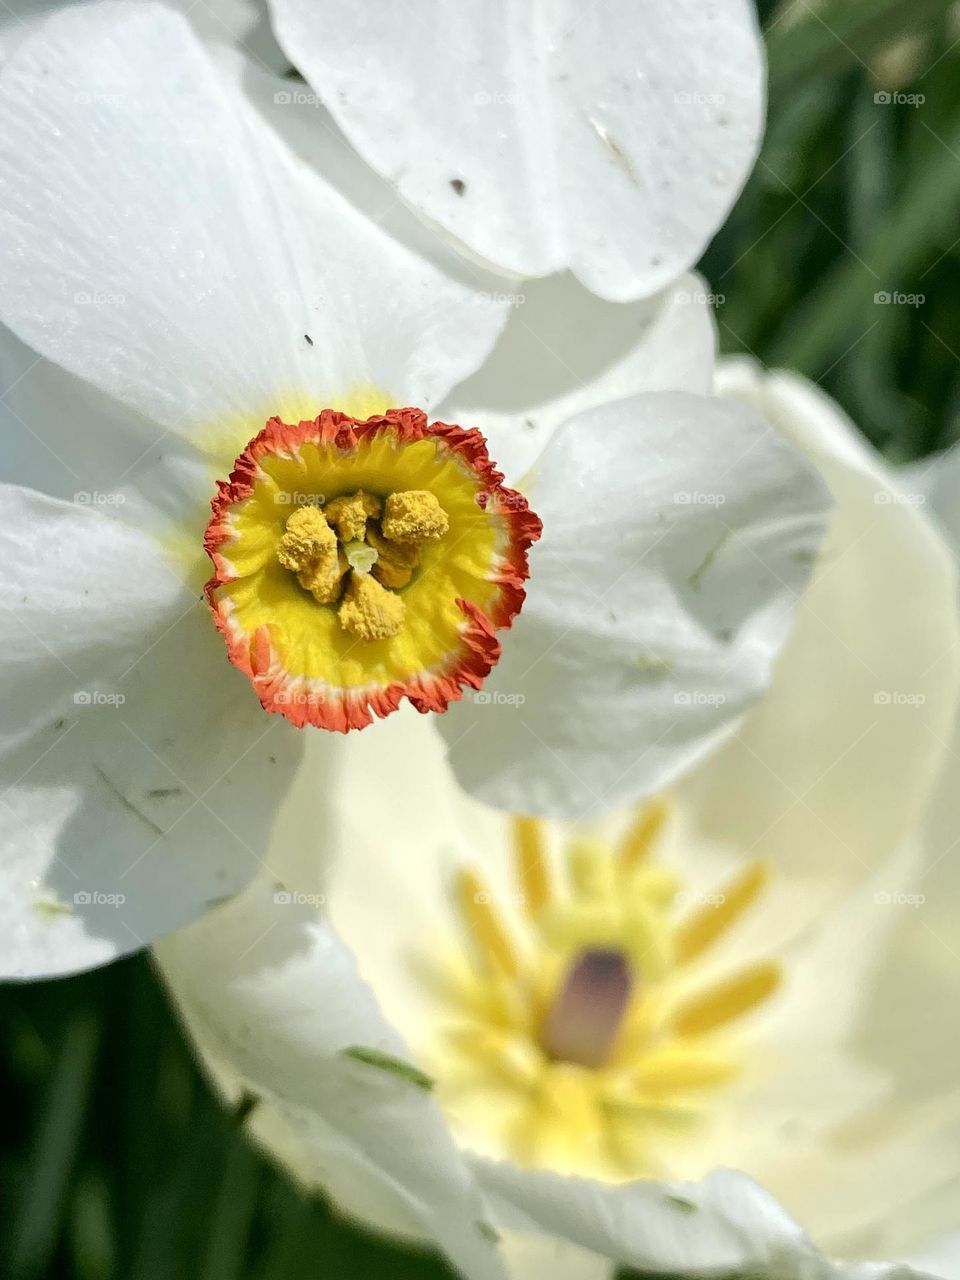 Close up of a white daffodil with a red and yellow center in front of a white tulip